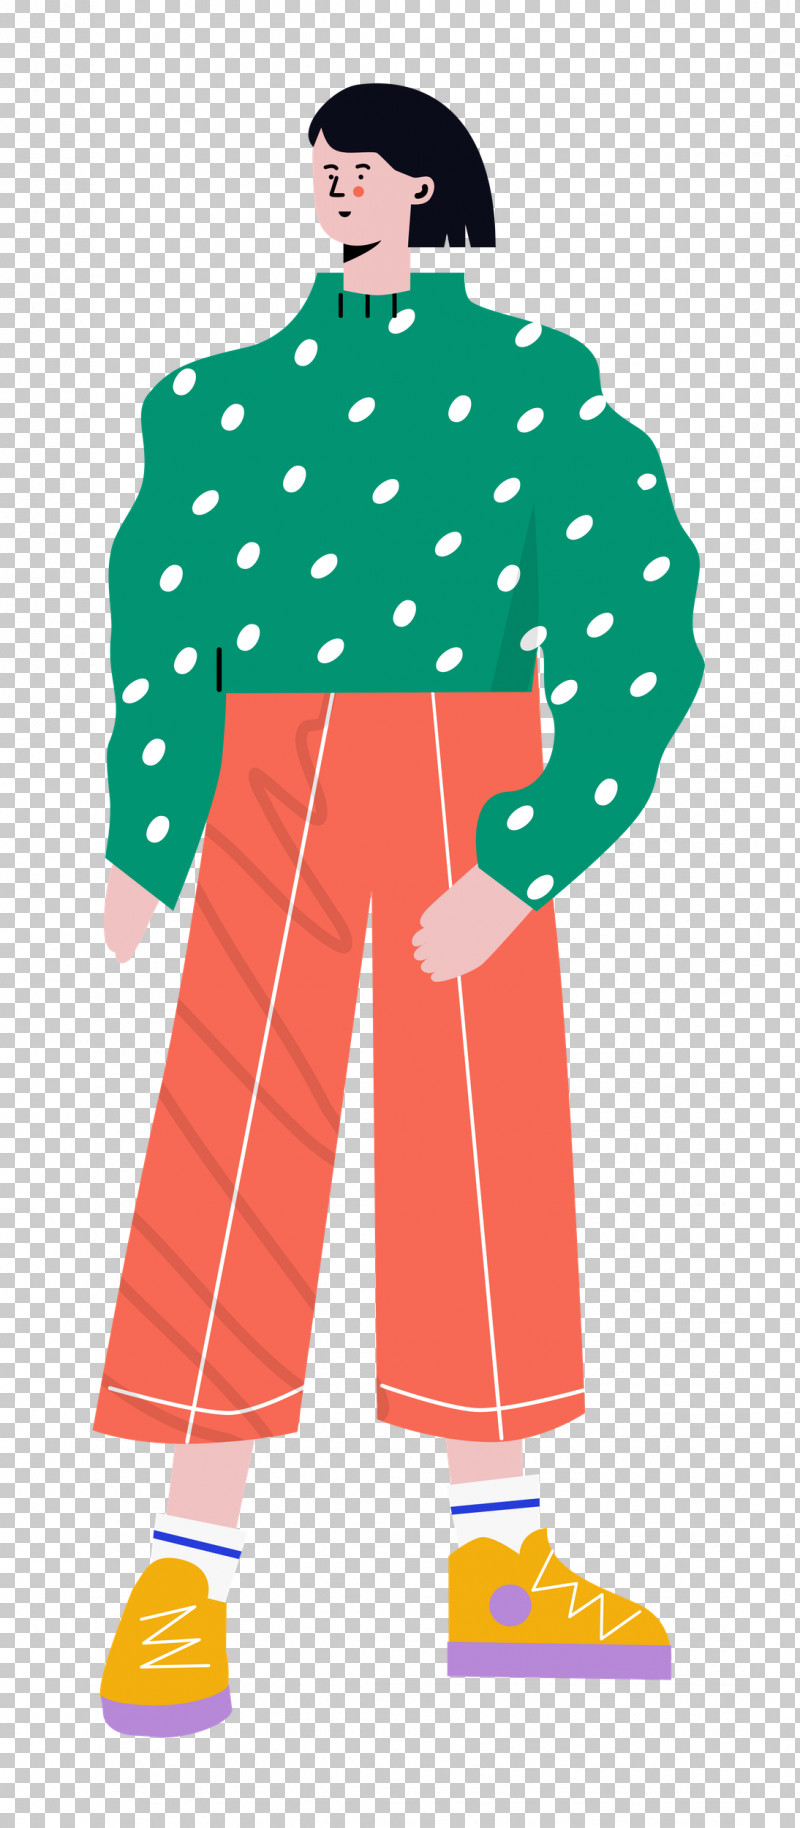 Standing PNG, Clipart, Clothing, Costume, Costume Design, Halftone, Polka Free PNG Download